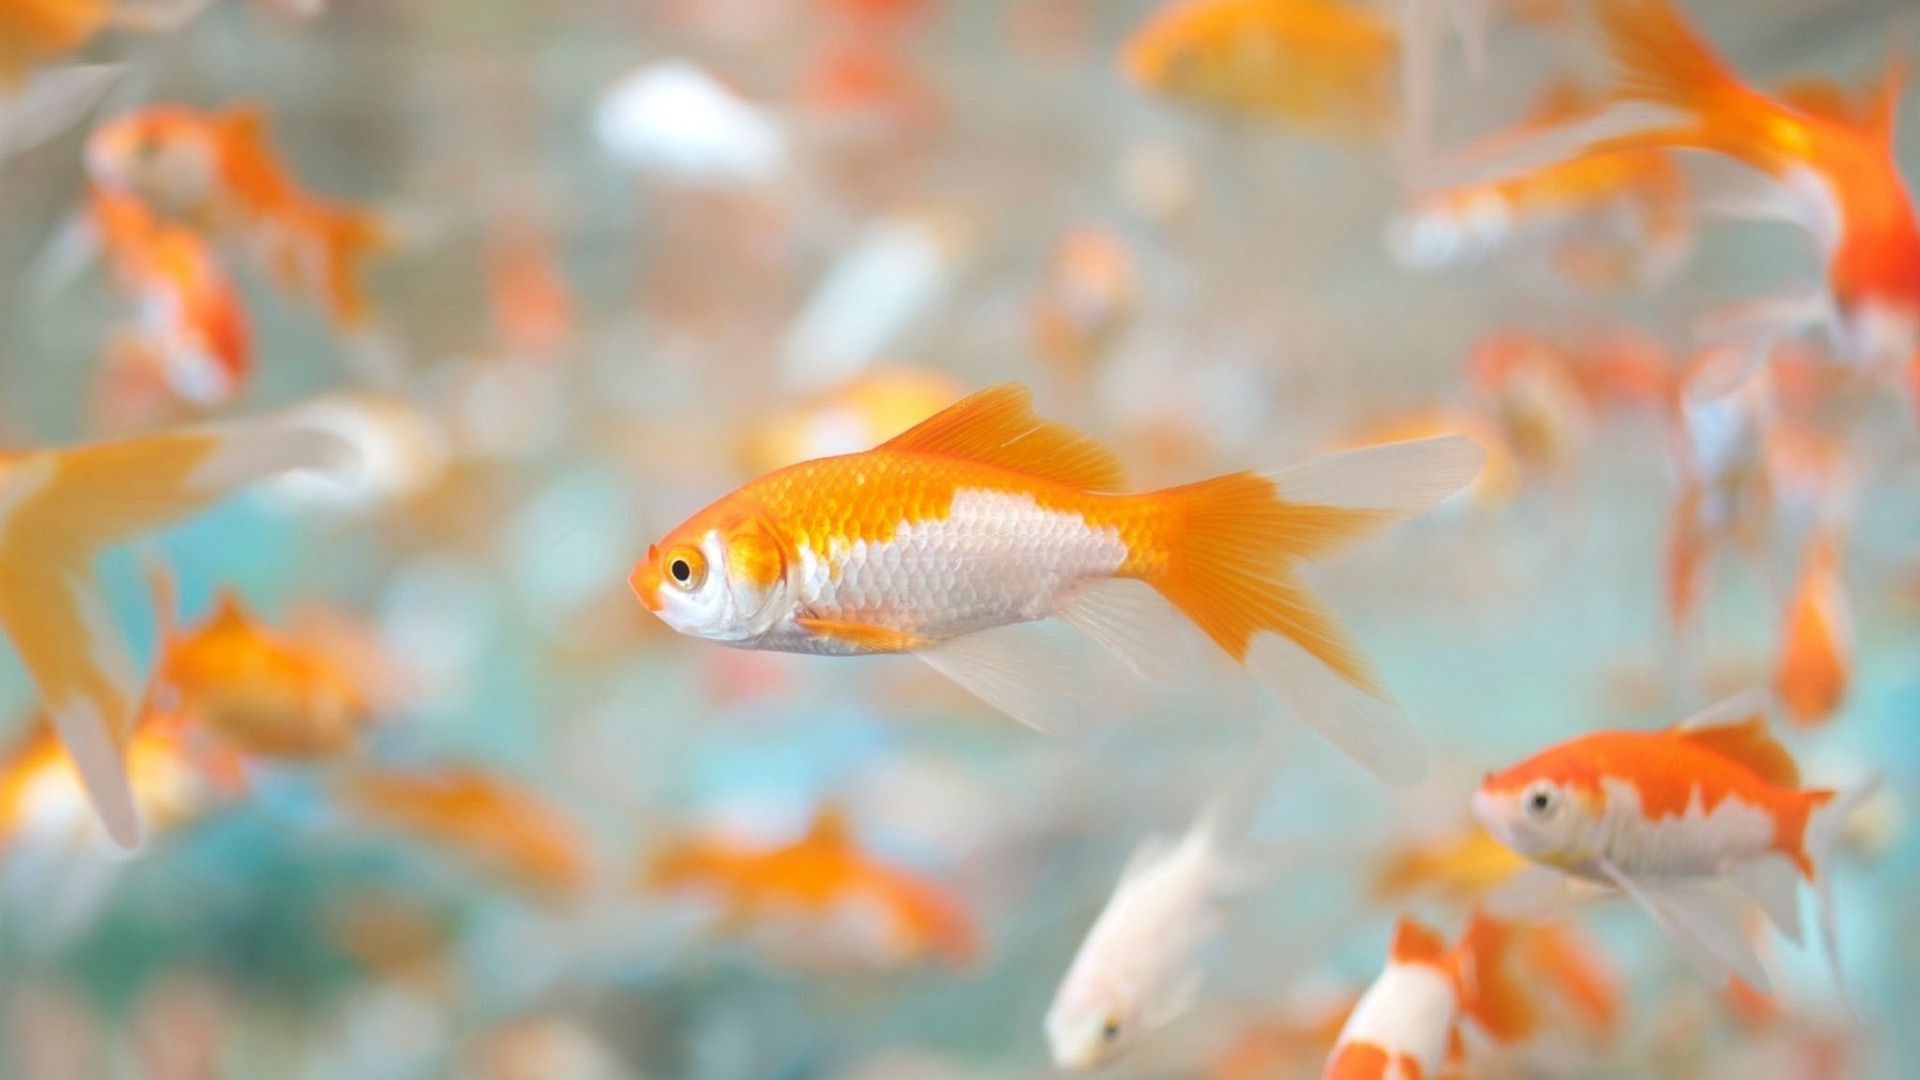 Goldfish: Was selectively bred for color in imperial China more than 1,000 years ago. 1920x1080 Full HD Wallpaper.